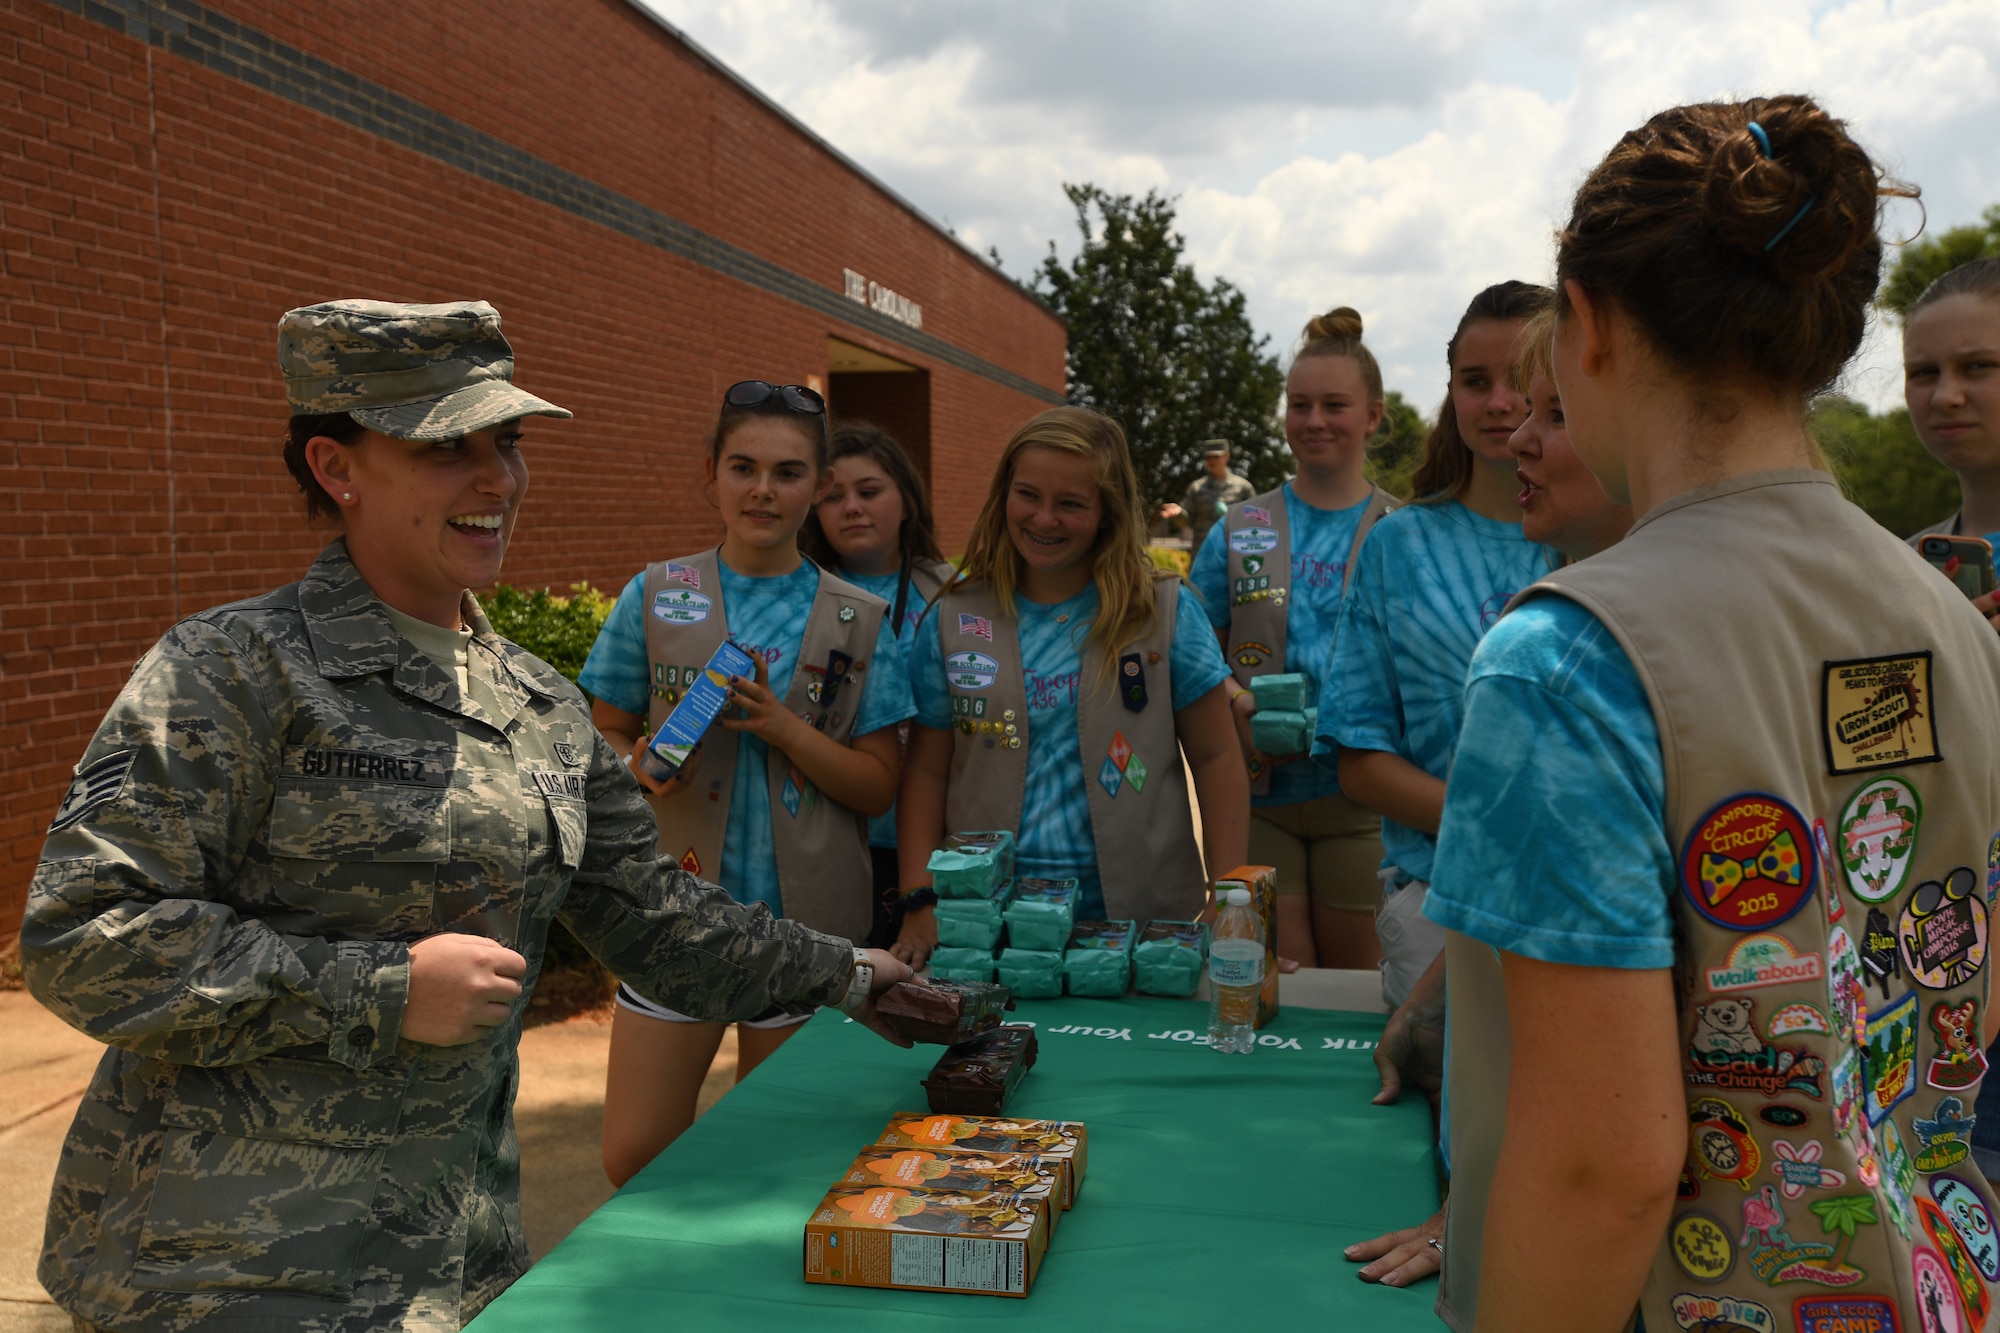 U.S. Air Force Staff Sgt. Amanda Gutierrez, 145th Medical Group, picks up her favorite  box of cookies from Girl Scouts of Troop 20436, Denver, N.C., as they volunteer during the fifth annual visit to the North Carolina Air National Guard Base, Charlotte Douglas International Airport, June 9, 2018. This is part of a council-wide service project, called Operation Sweet Treat, where Girl Scouts collect cookies to give to U.S. military members serving in the United States and deployed overseas.